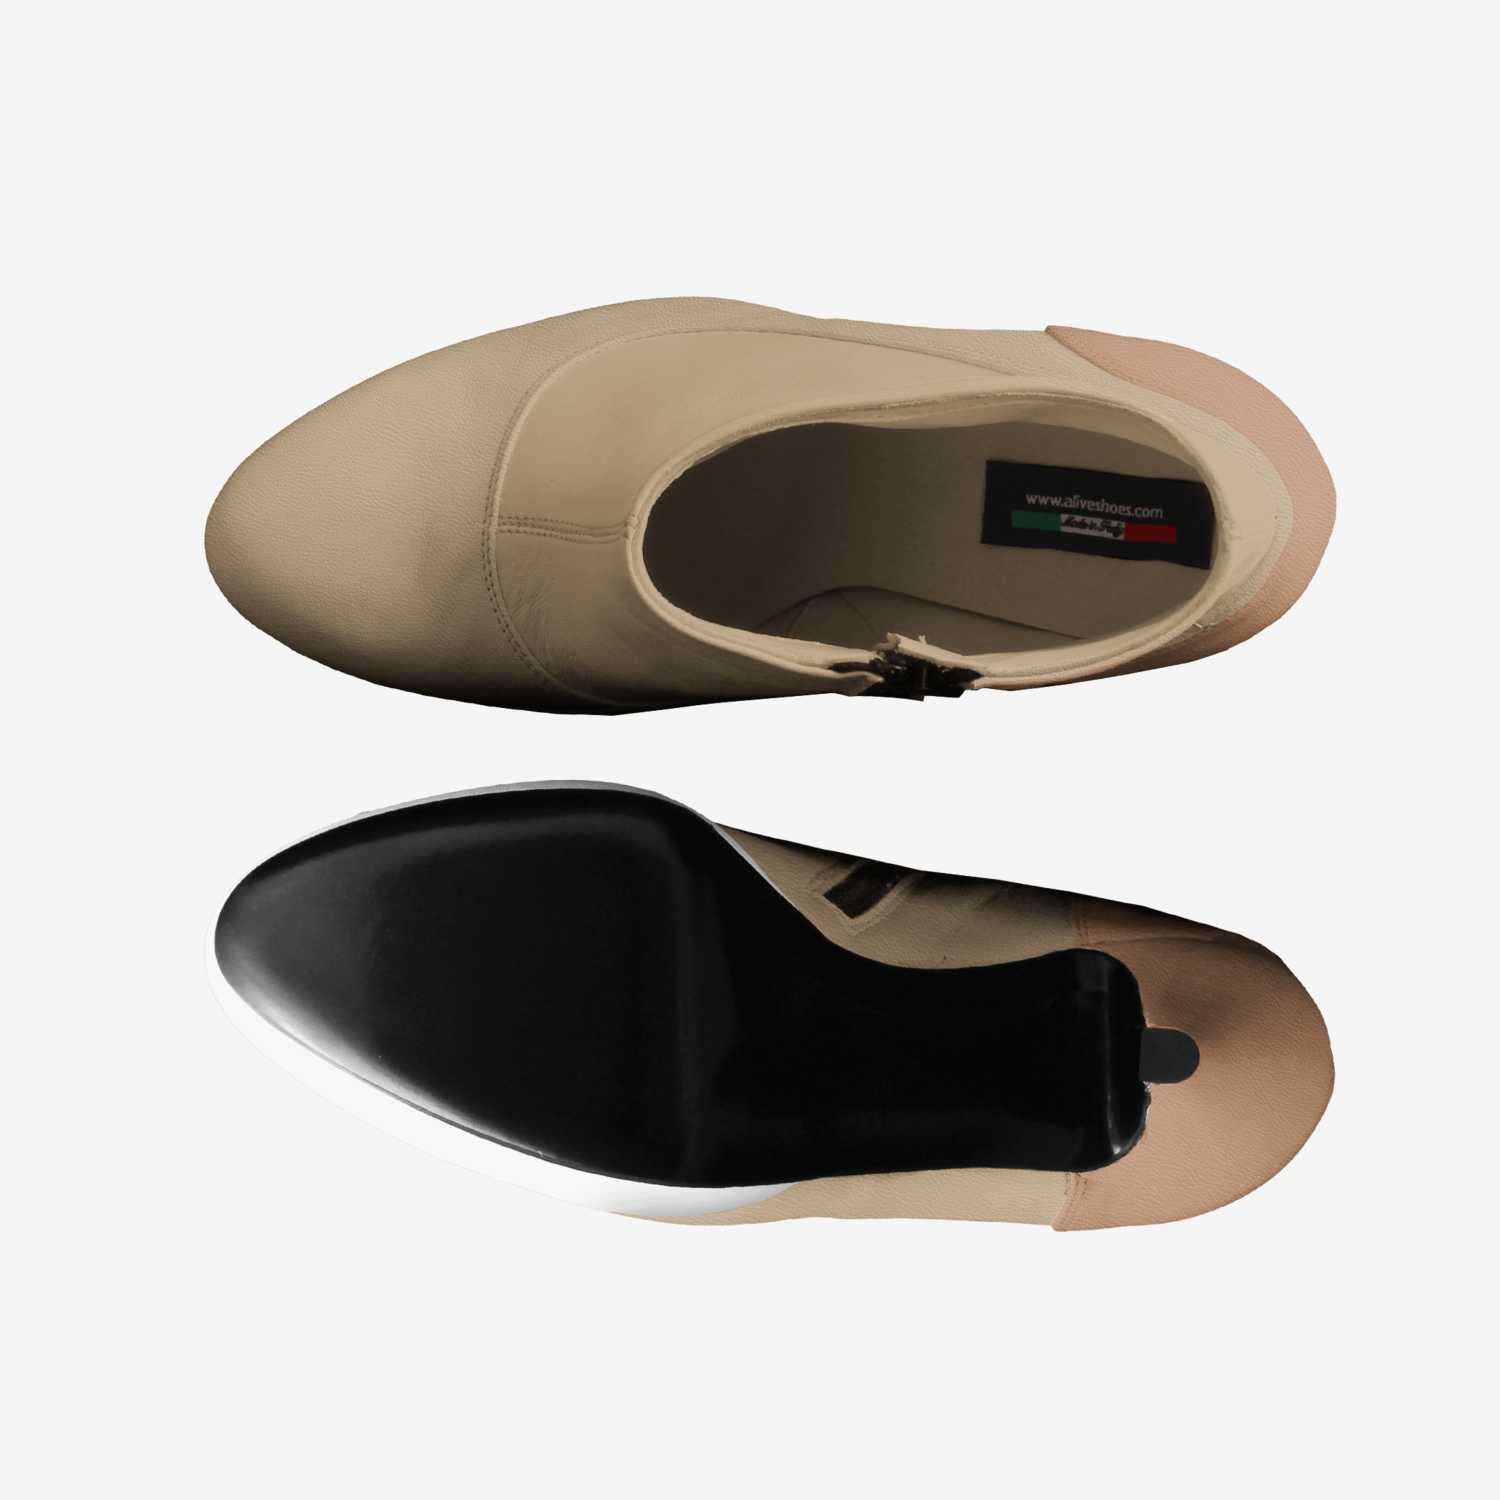 Cuggi | A Custom Shoe concept by Aiden Laing